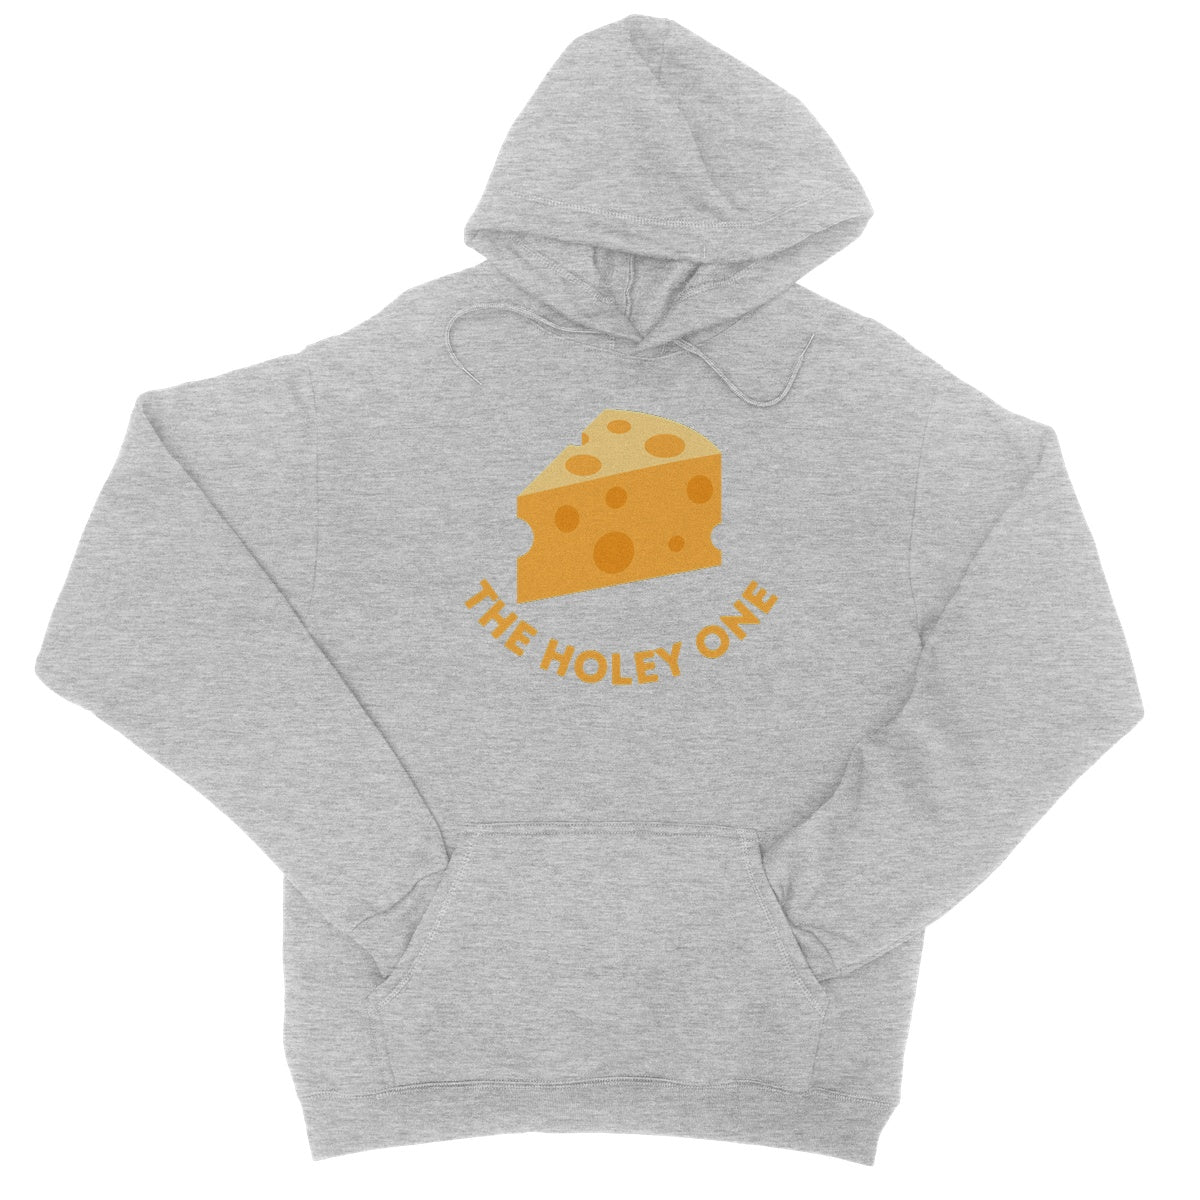 the holey cheese hoodie light grey